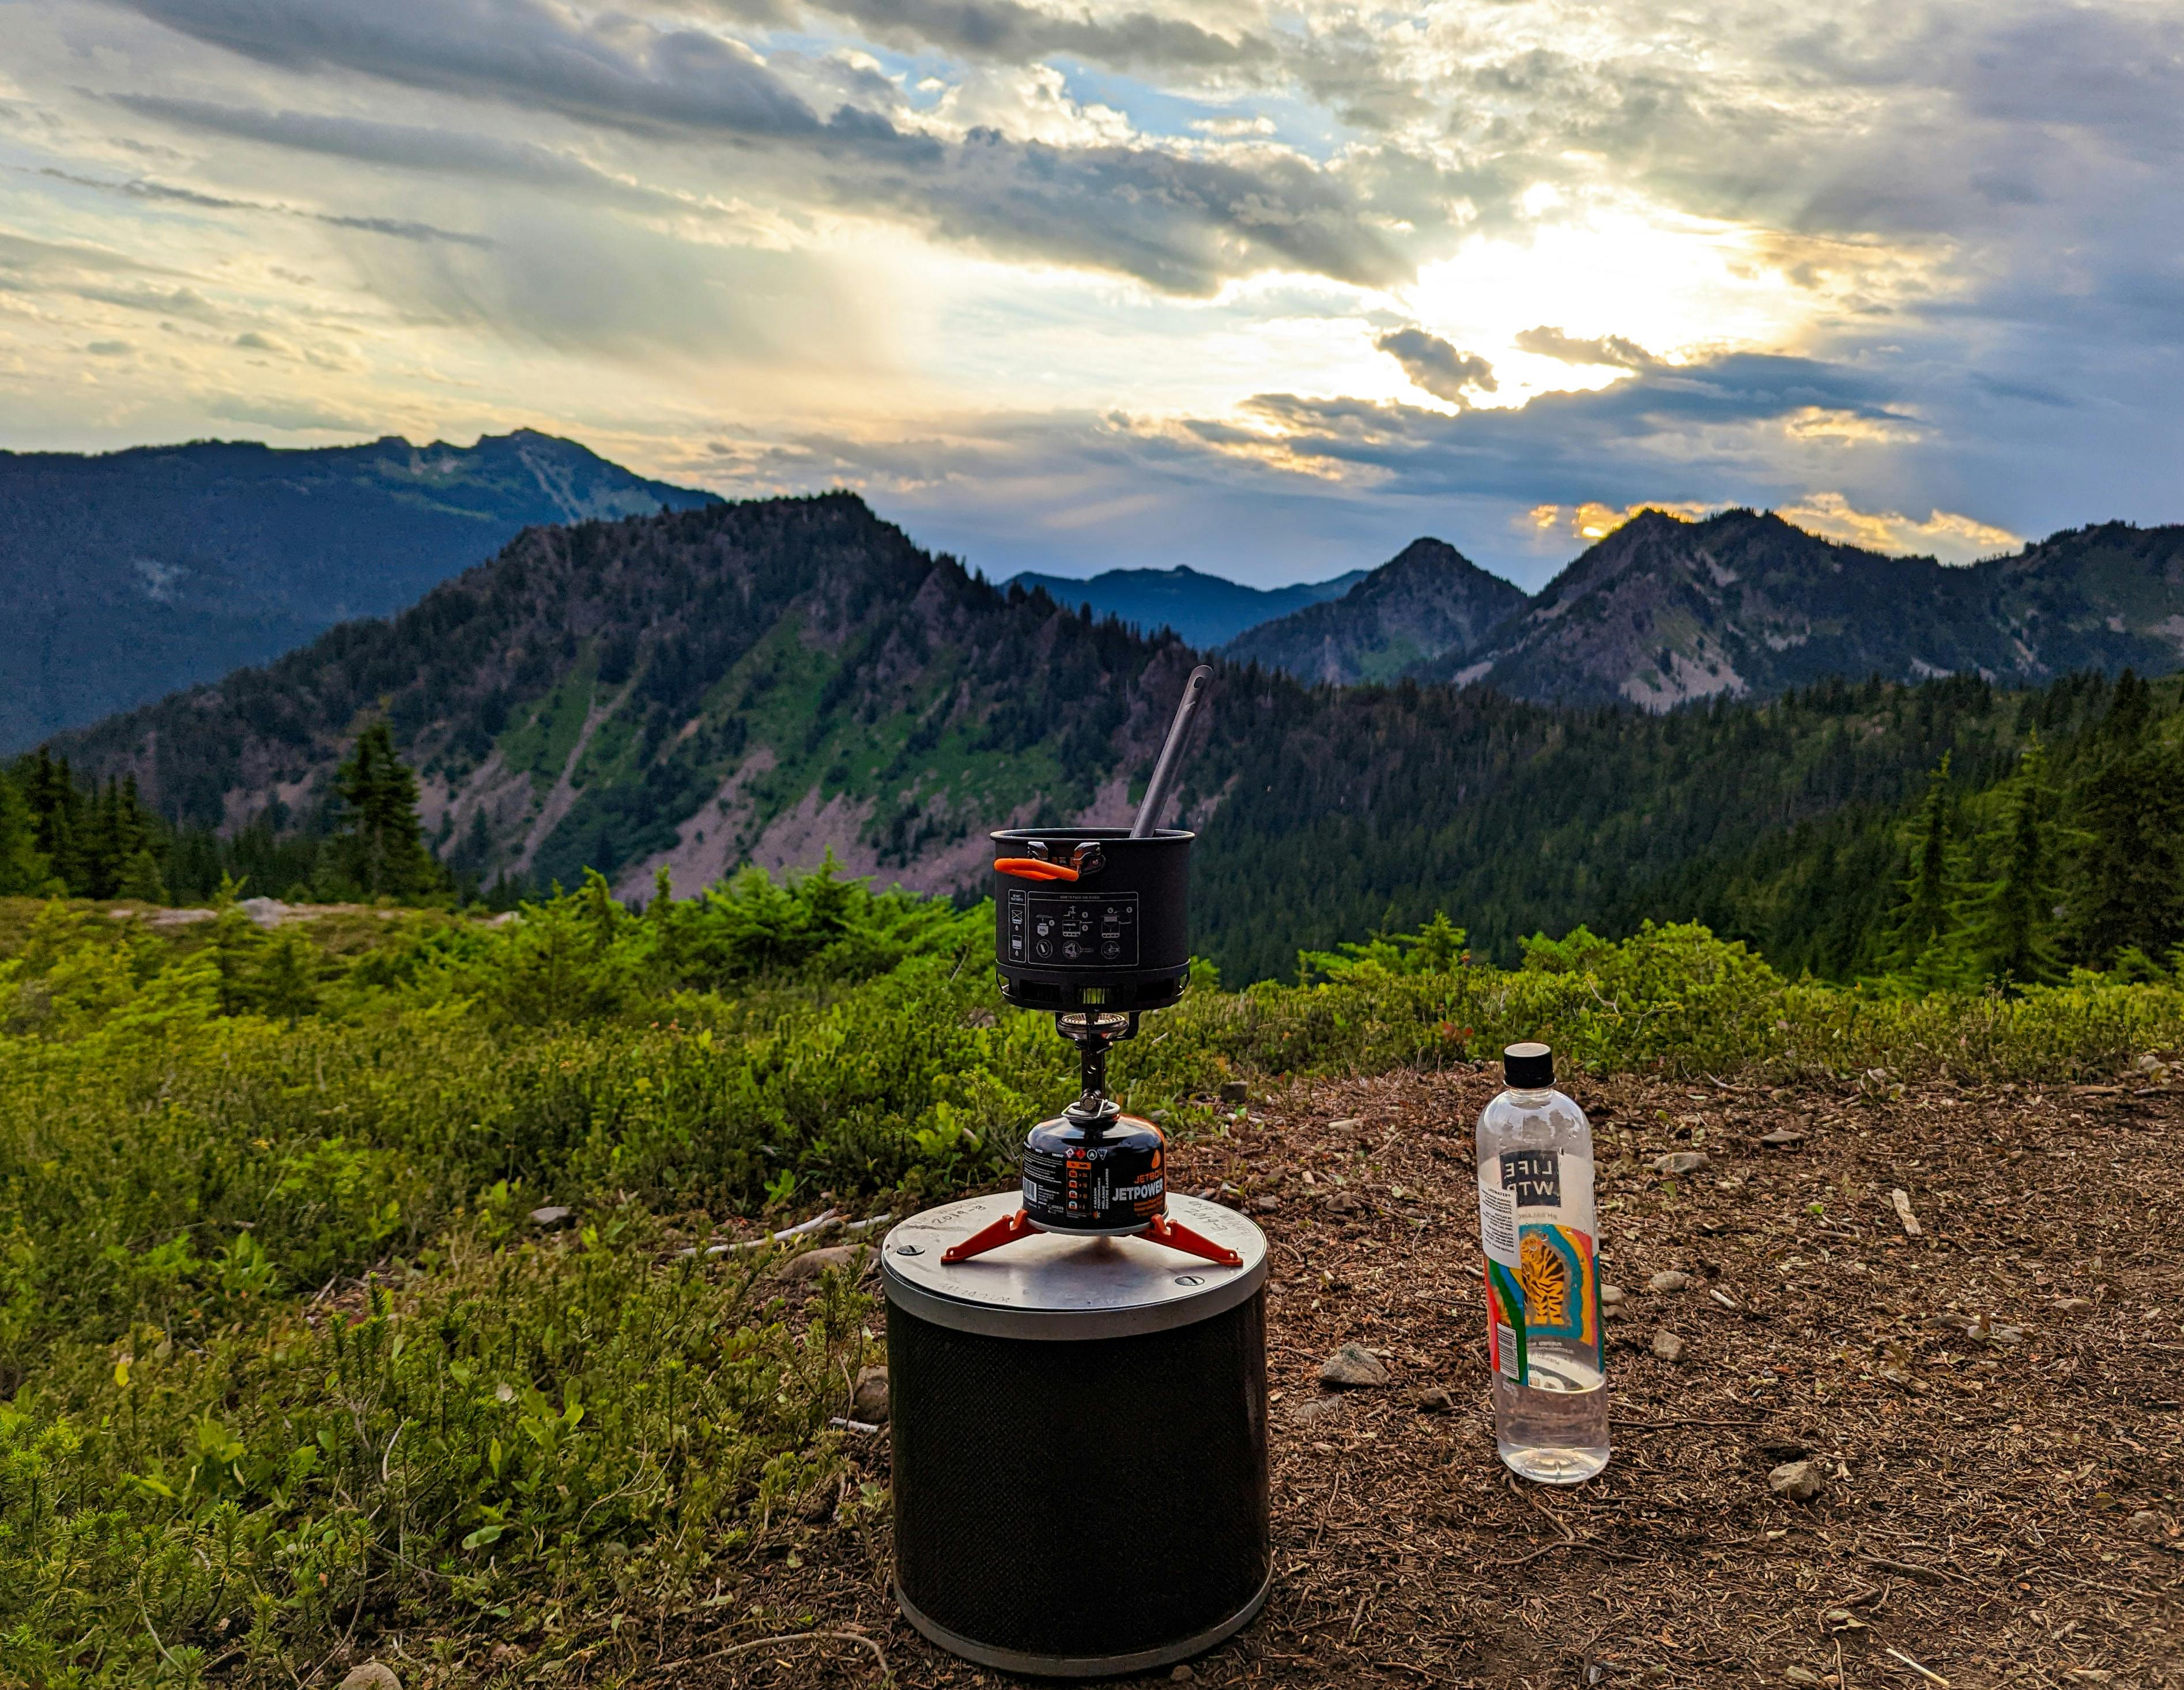 A camp stove on top of a bear canister. There are mountains in the distance. 